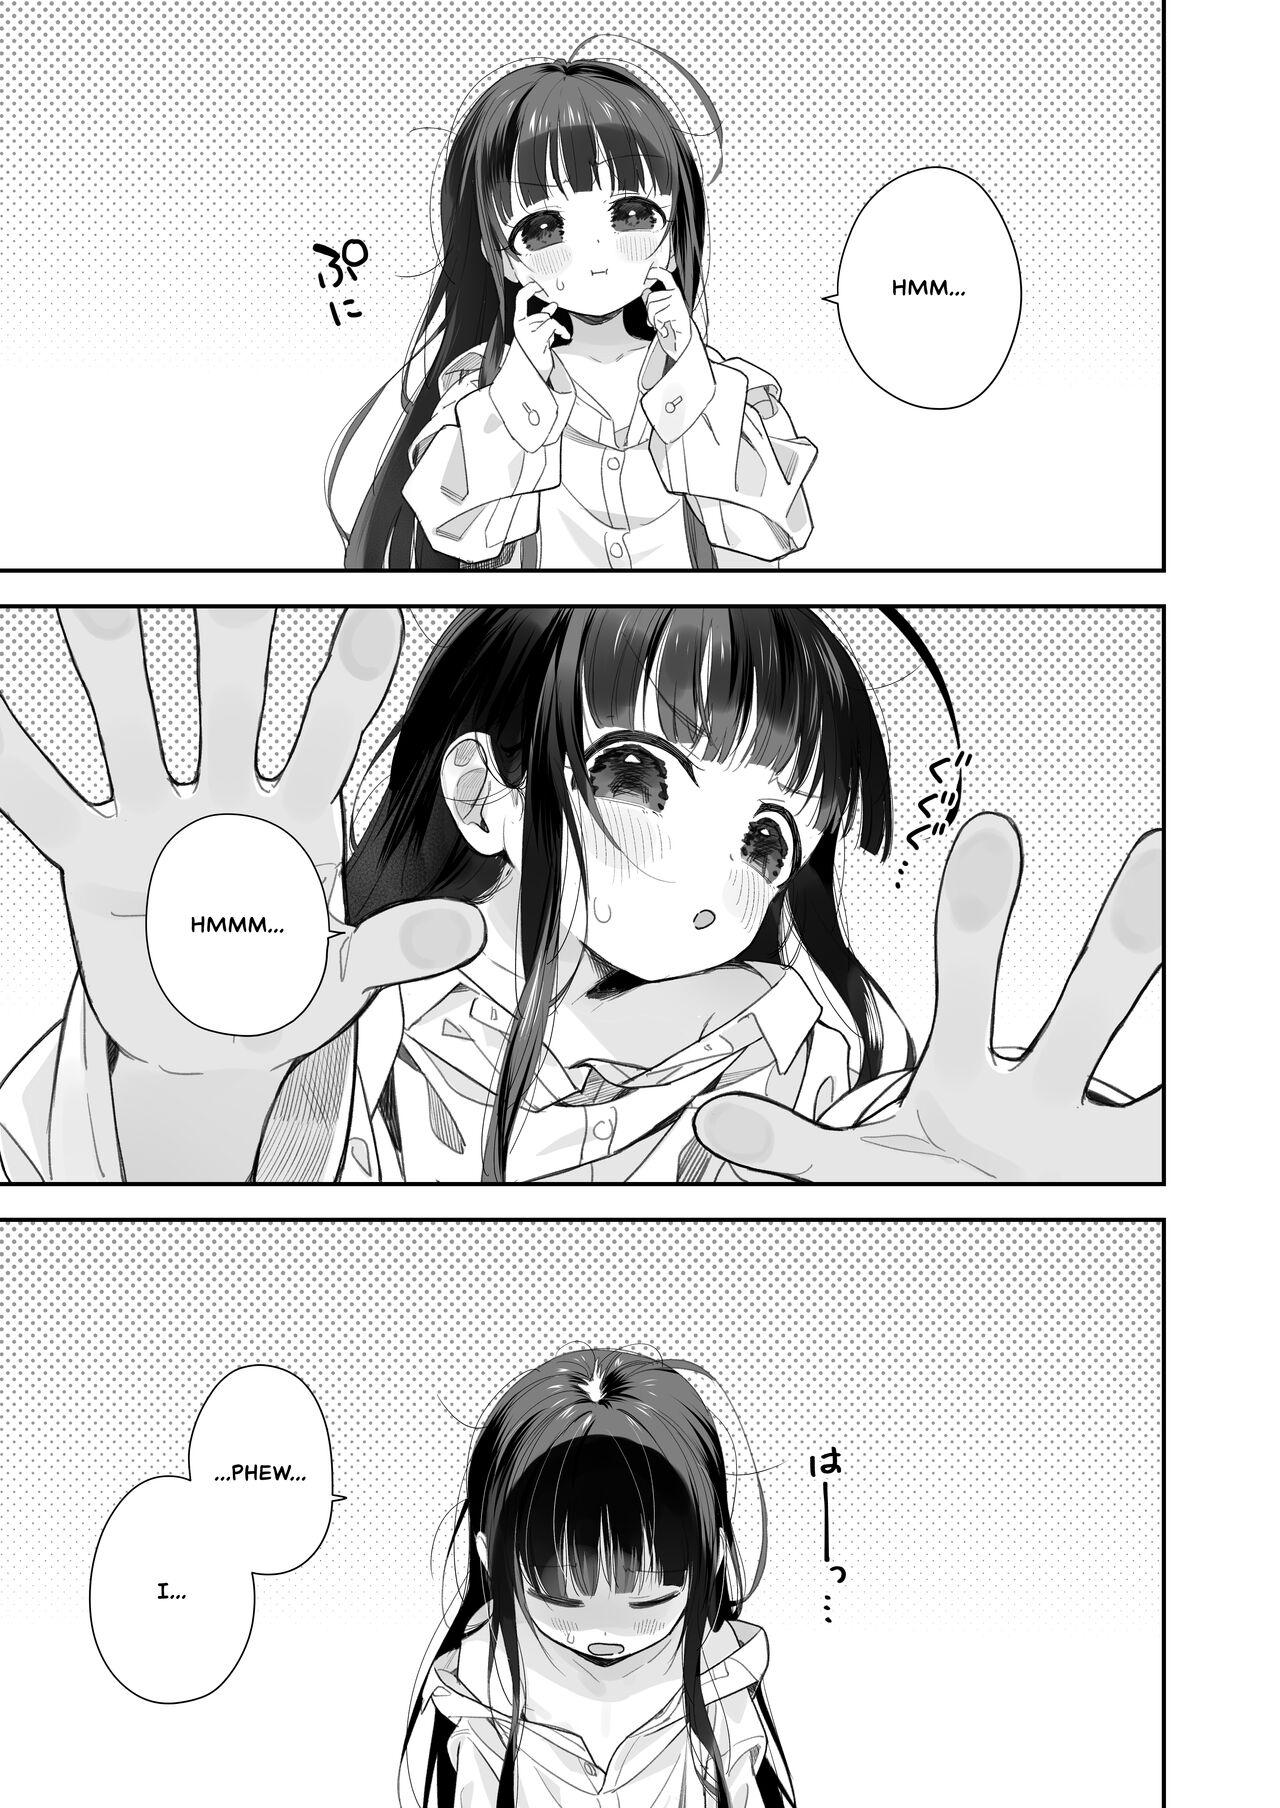 Big Boobs [Asunaro Neat. (Ronna)] TS Loli Oji-san no Bouken Onanie Hen | The Adventures of an Old Man Who Was Gender-Swapped Into a Loli ~Masturbation Chapter~ [English] [CulturedCommissions] [Digital] - Original Girl Gets Fucked - Picture 2